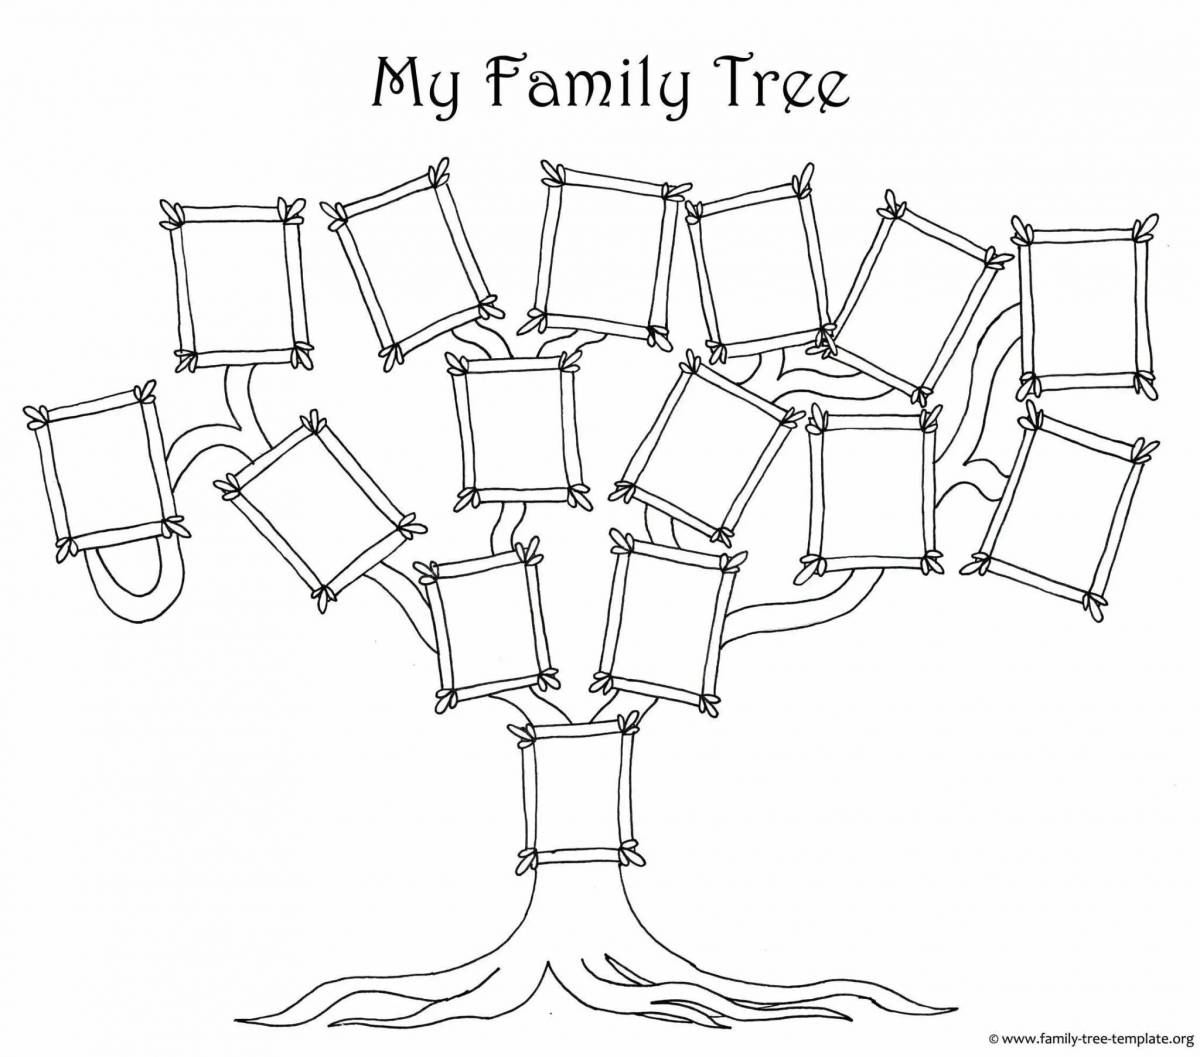 Deluxe family tree template to fill out